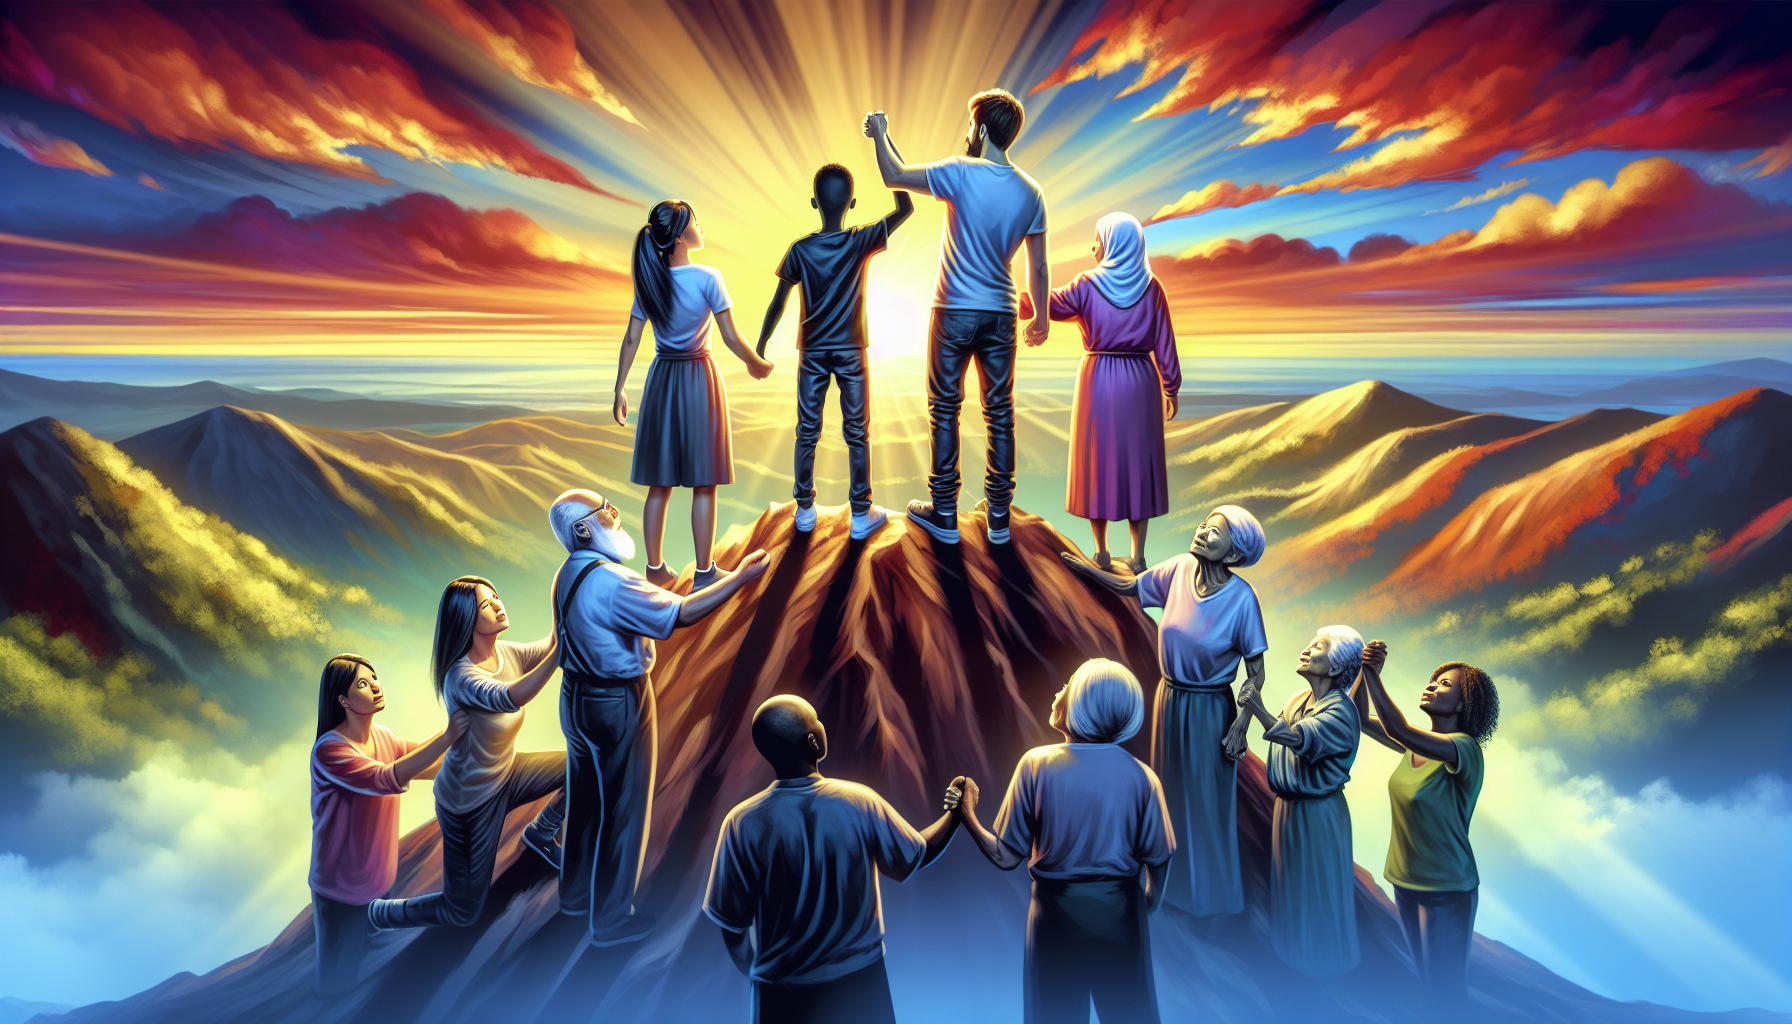 An inspirational digital painting of a diverse group of people standing on the peak of a mountain, uplifting each other, with the sunrise in the background and the phrase 'Puedo hacer todas las cosas